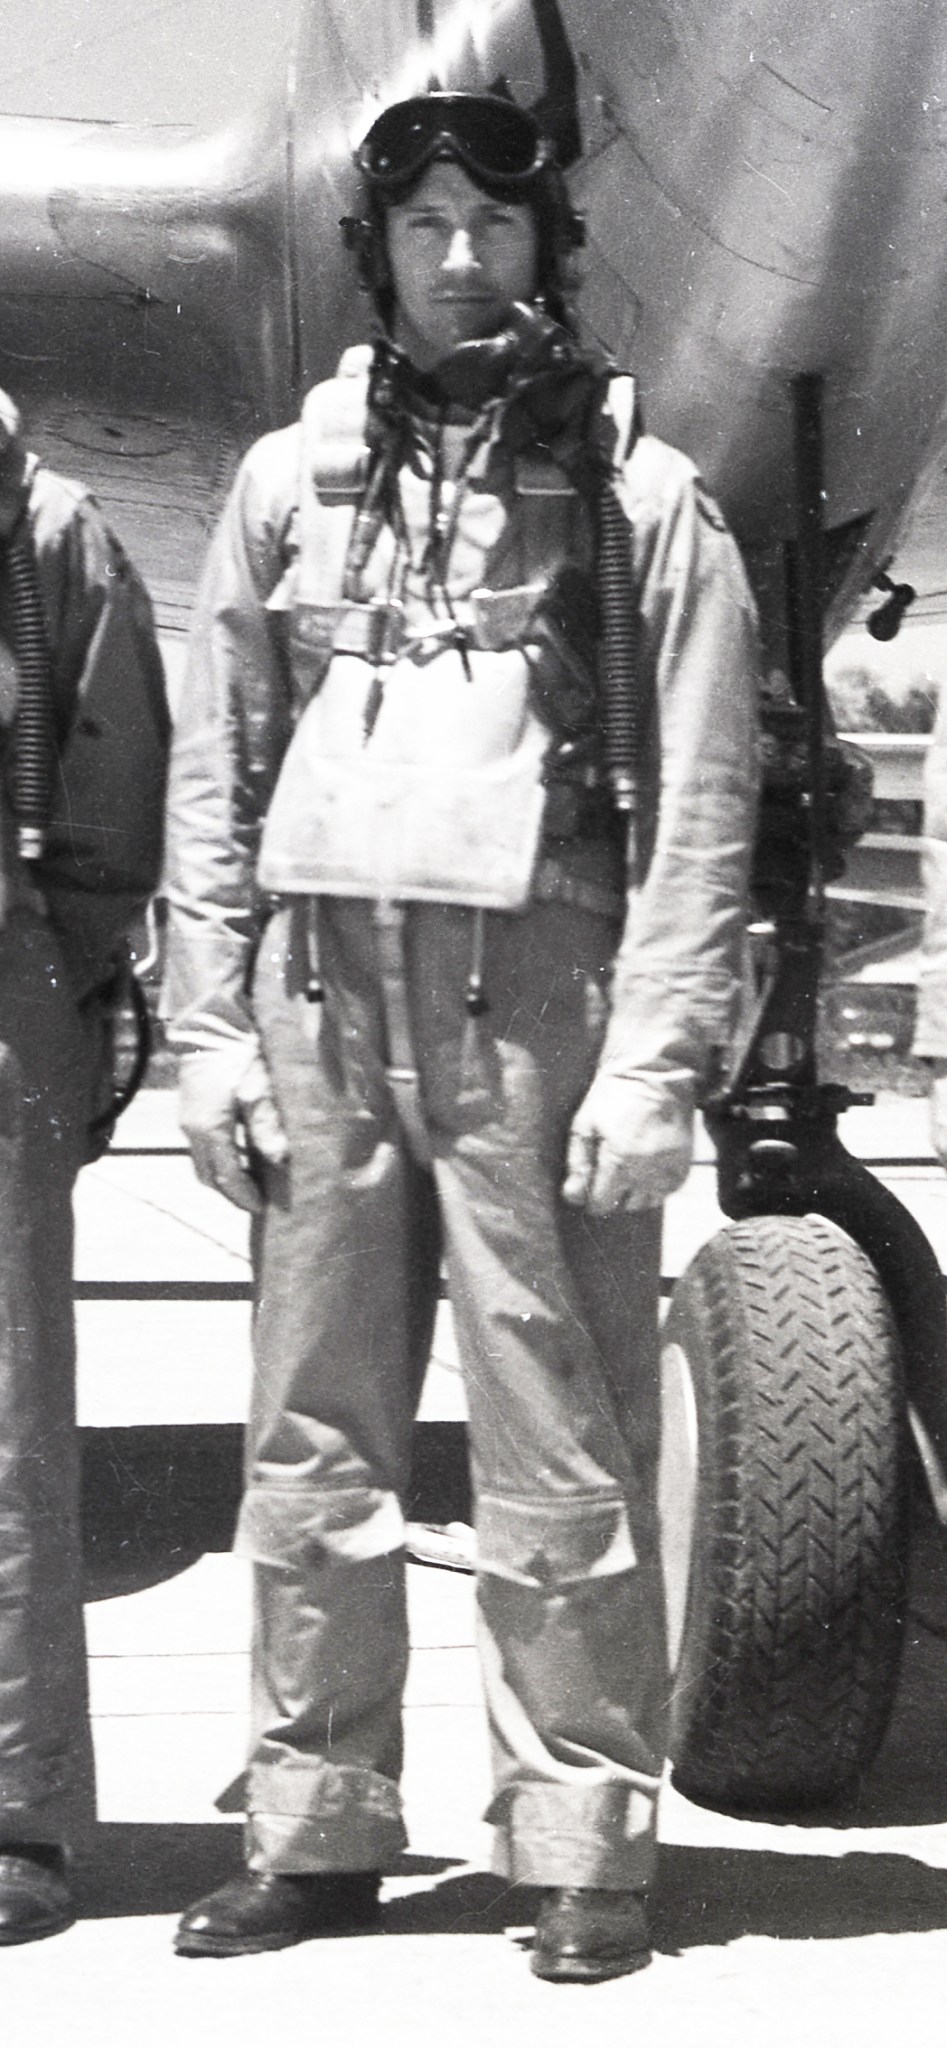 Pilot standing in front of aircraft.